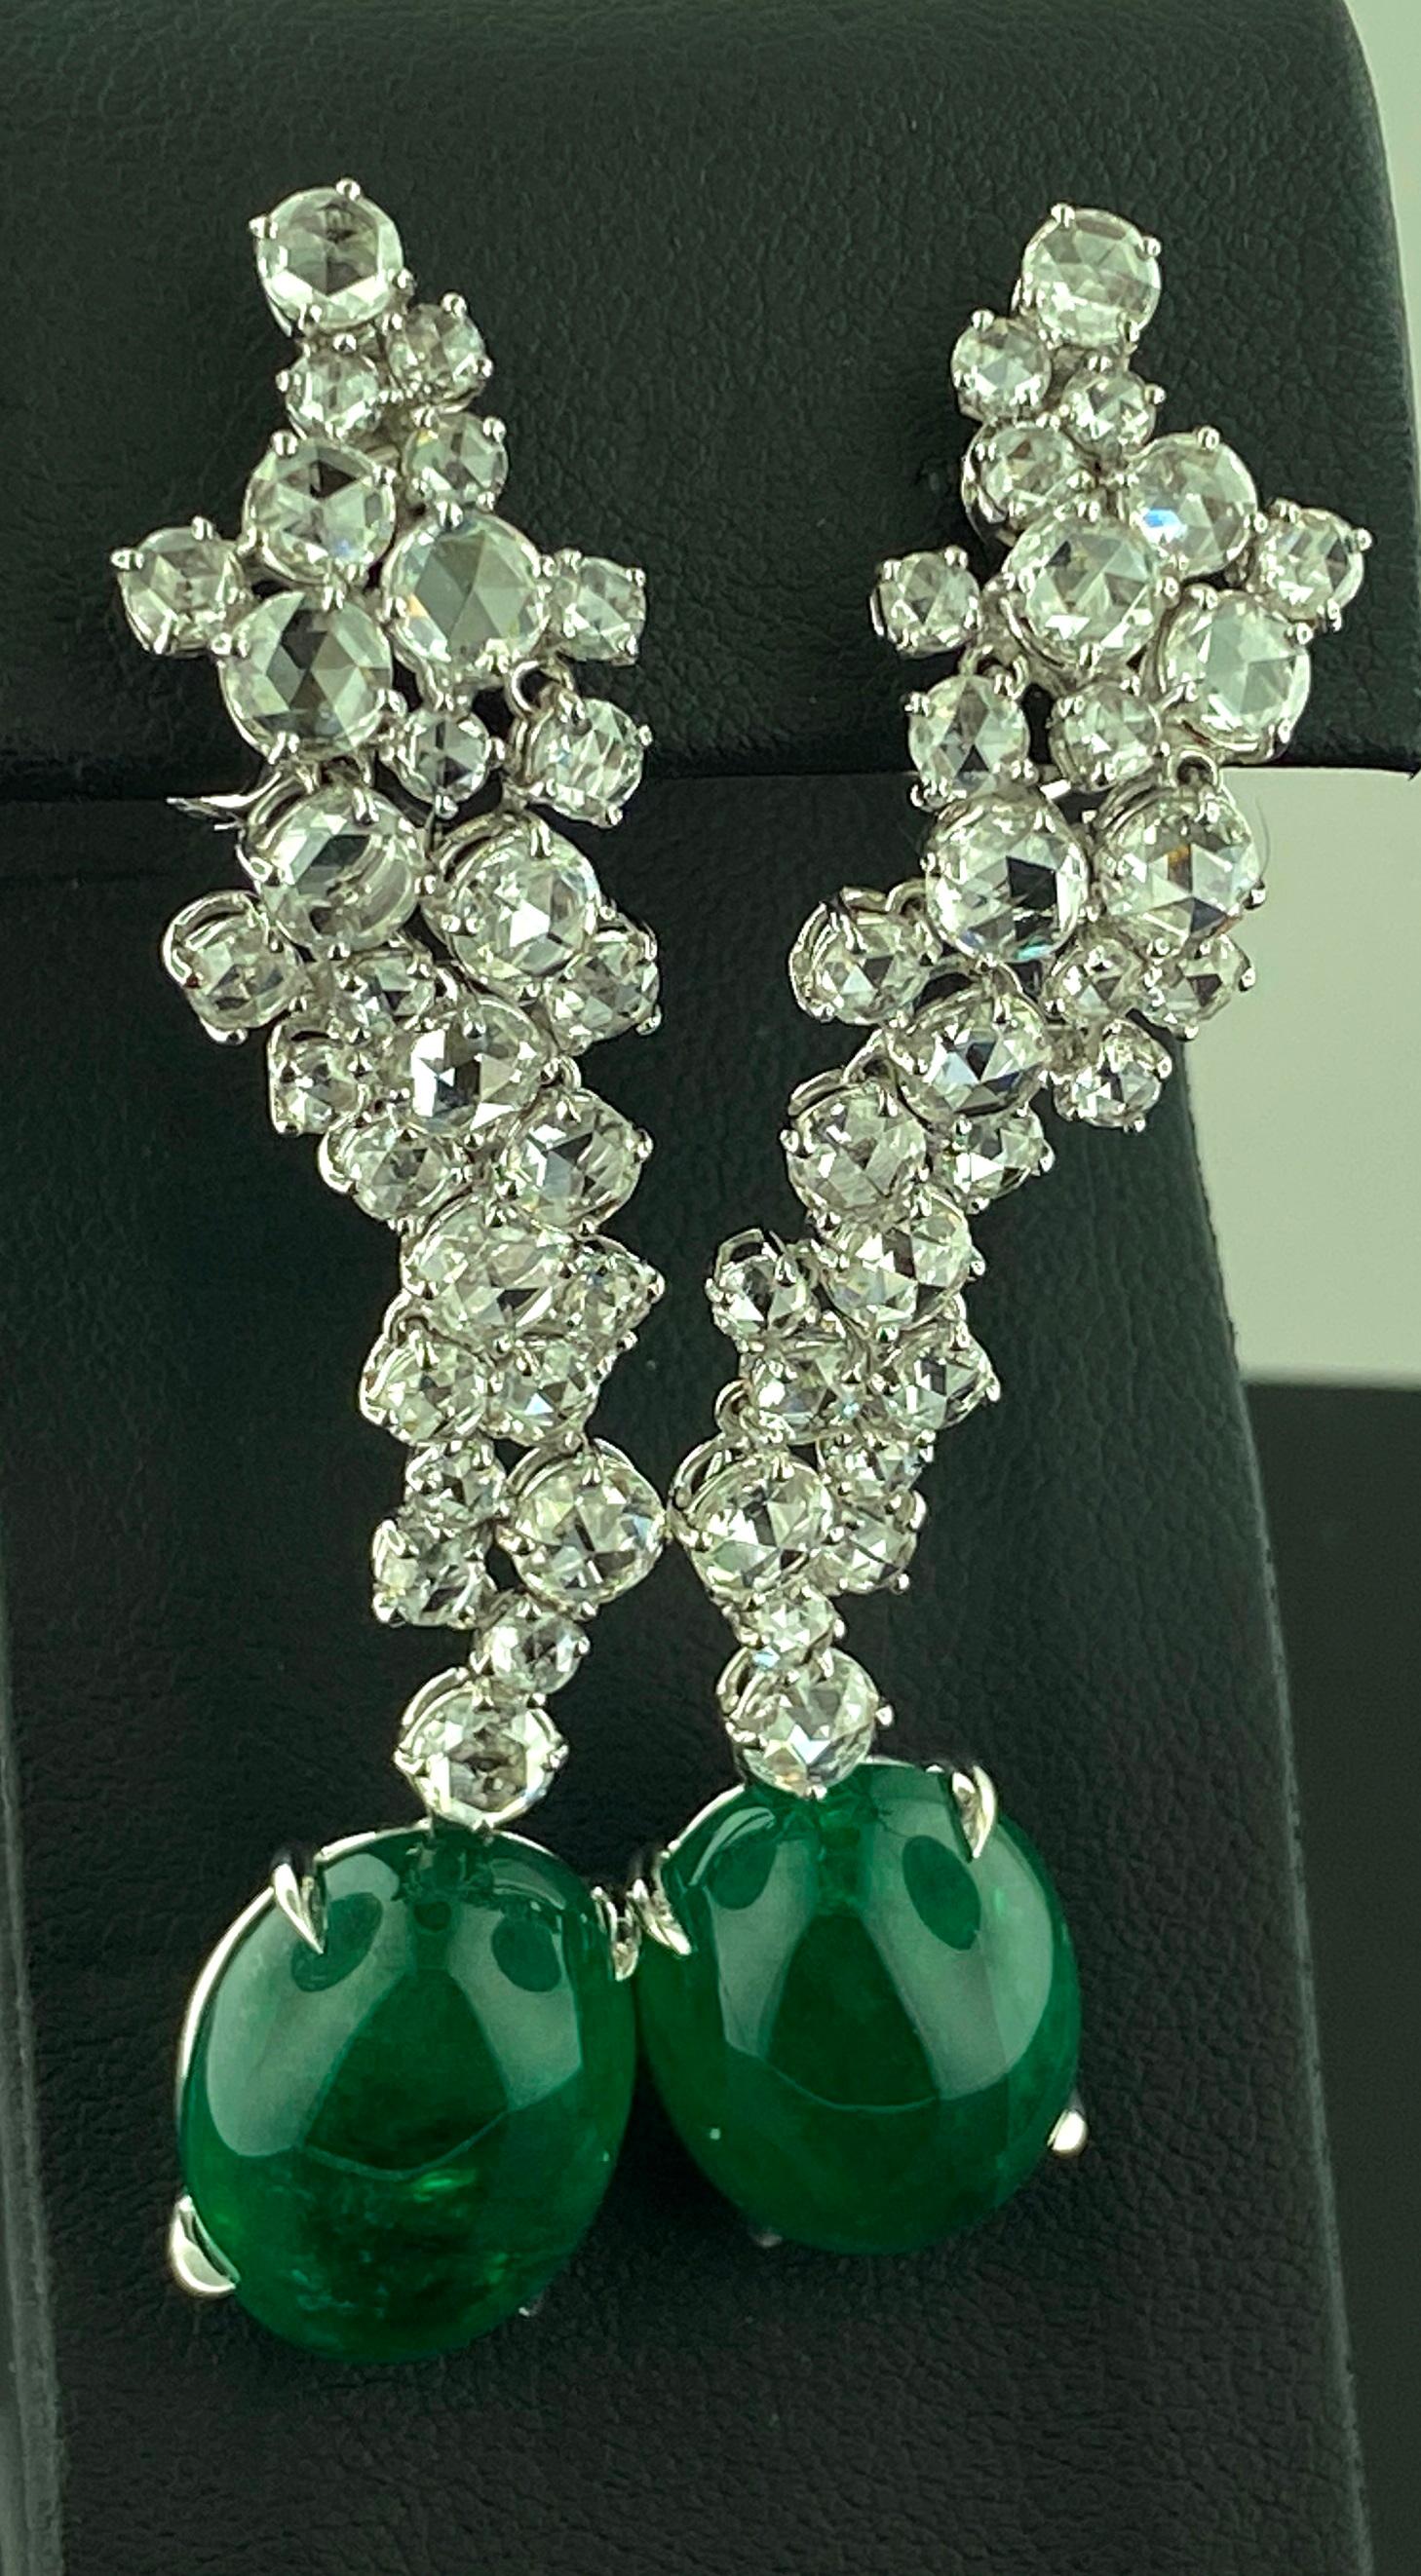 set in 18 karat white gold 6.90 carats, total diamond weight for both ears, of round brilliant cut diamonds with 2 oval cut Cabochon Emeralds at the bottom with a total weight of 26.07 carats.